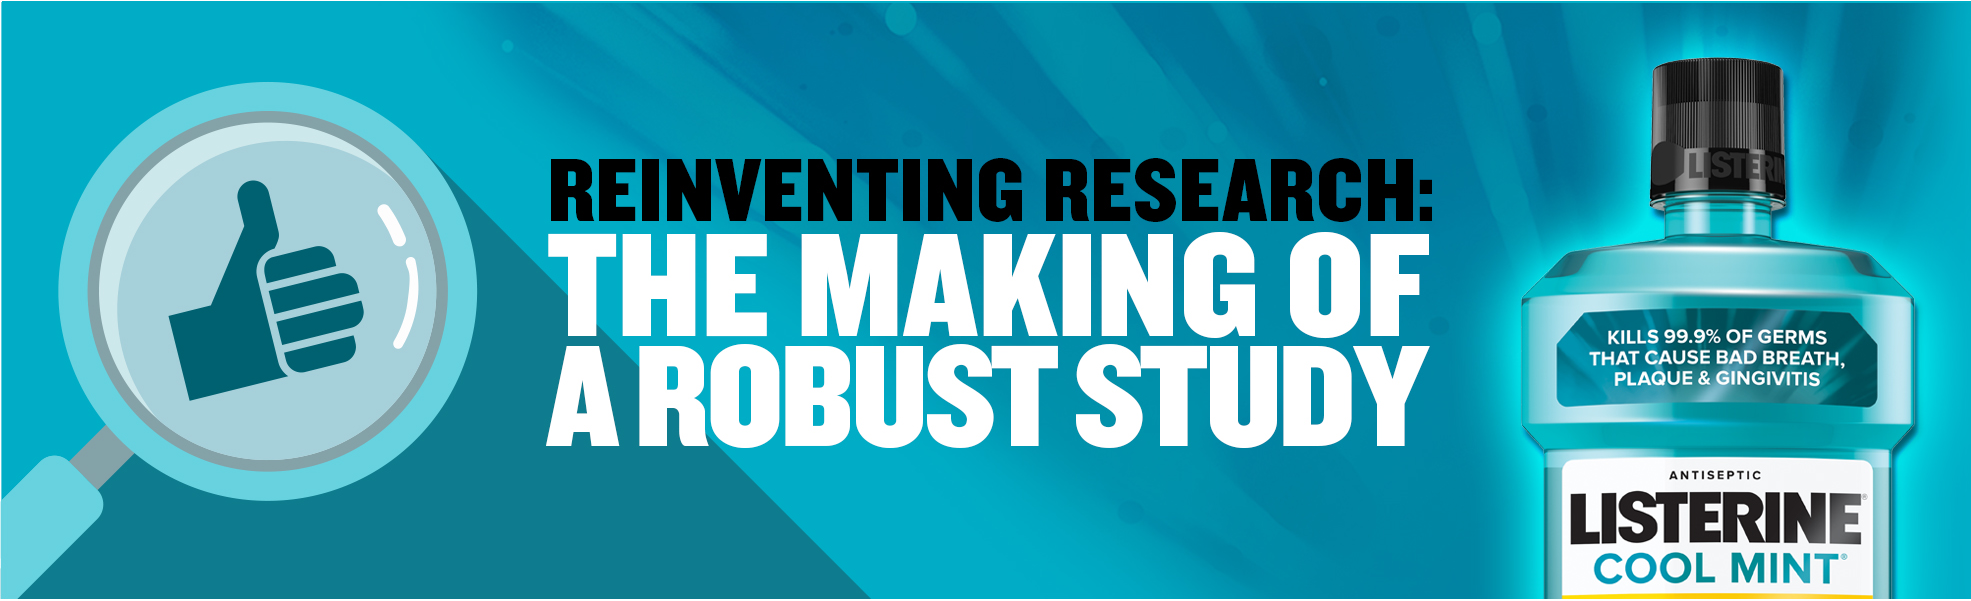 The Making of a Robust Study